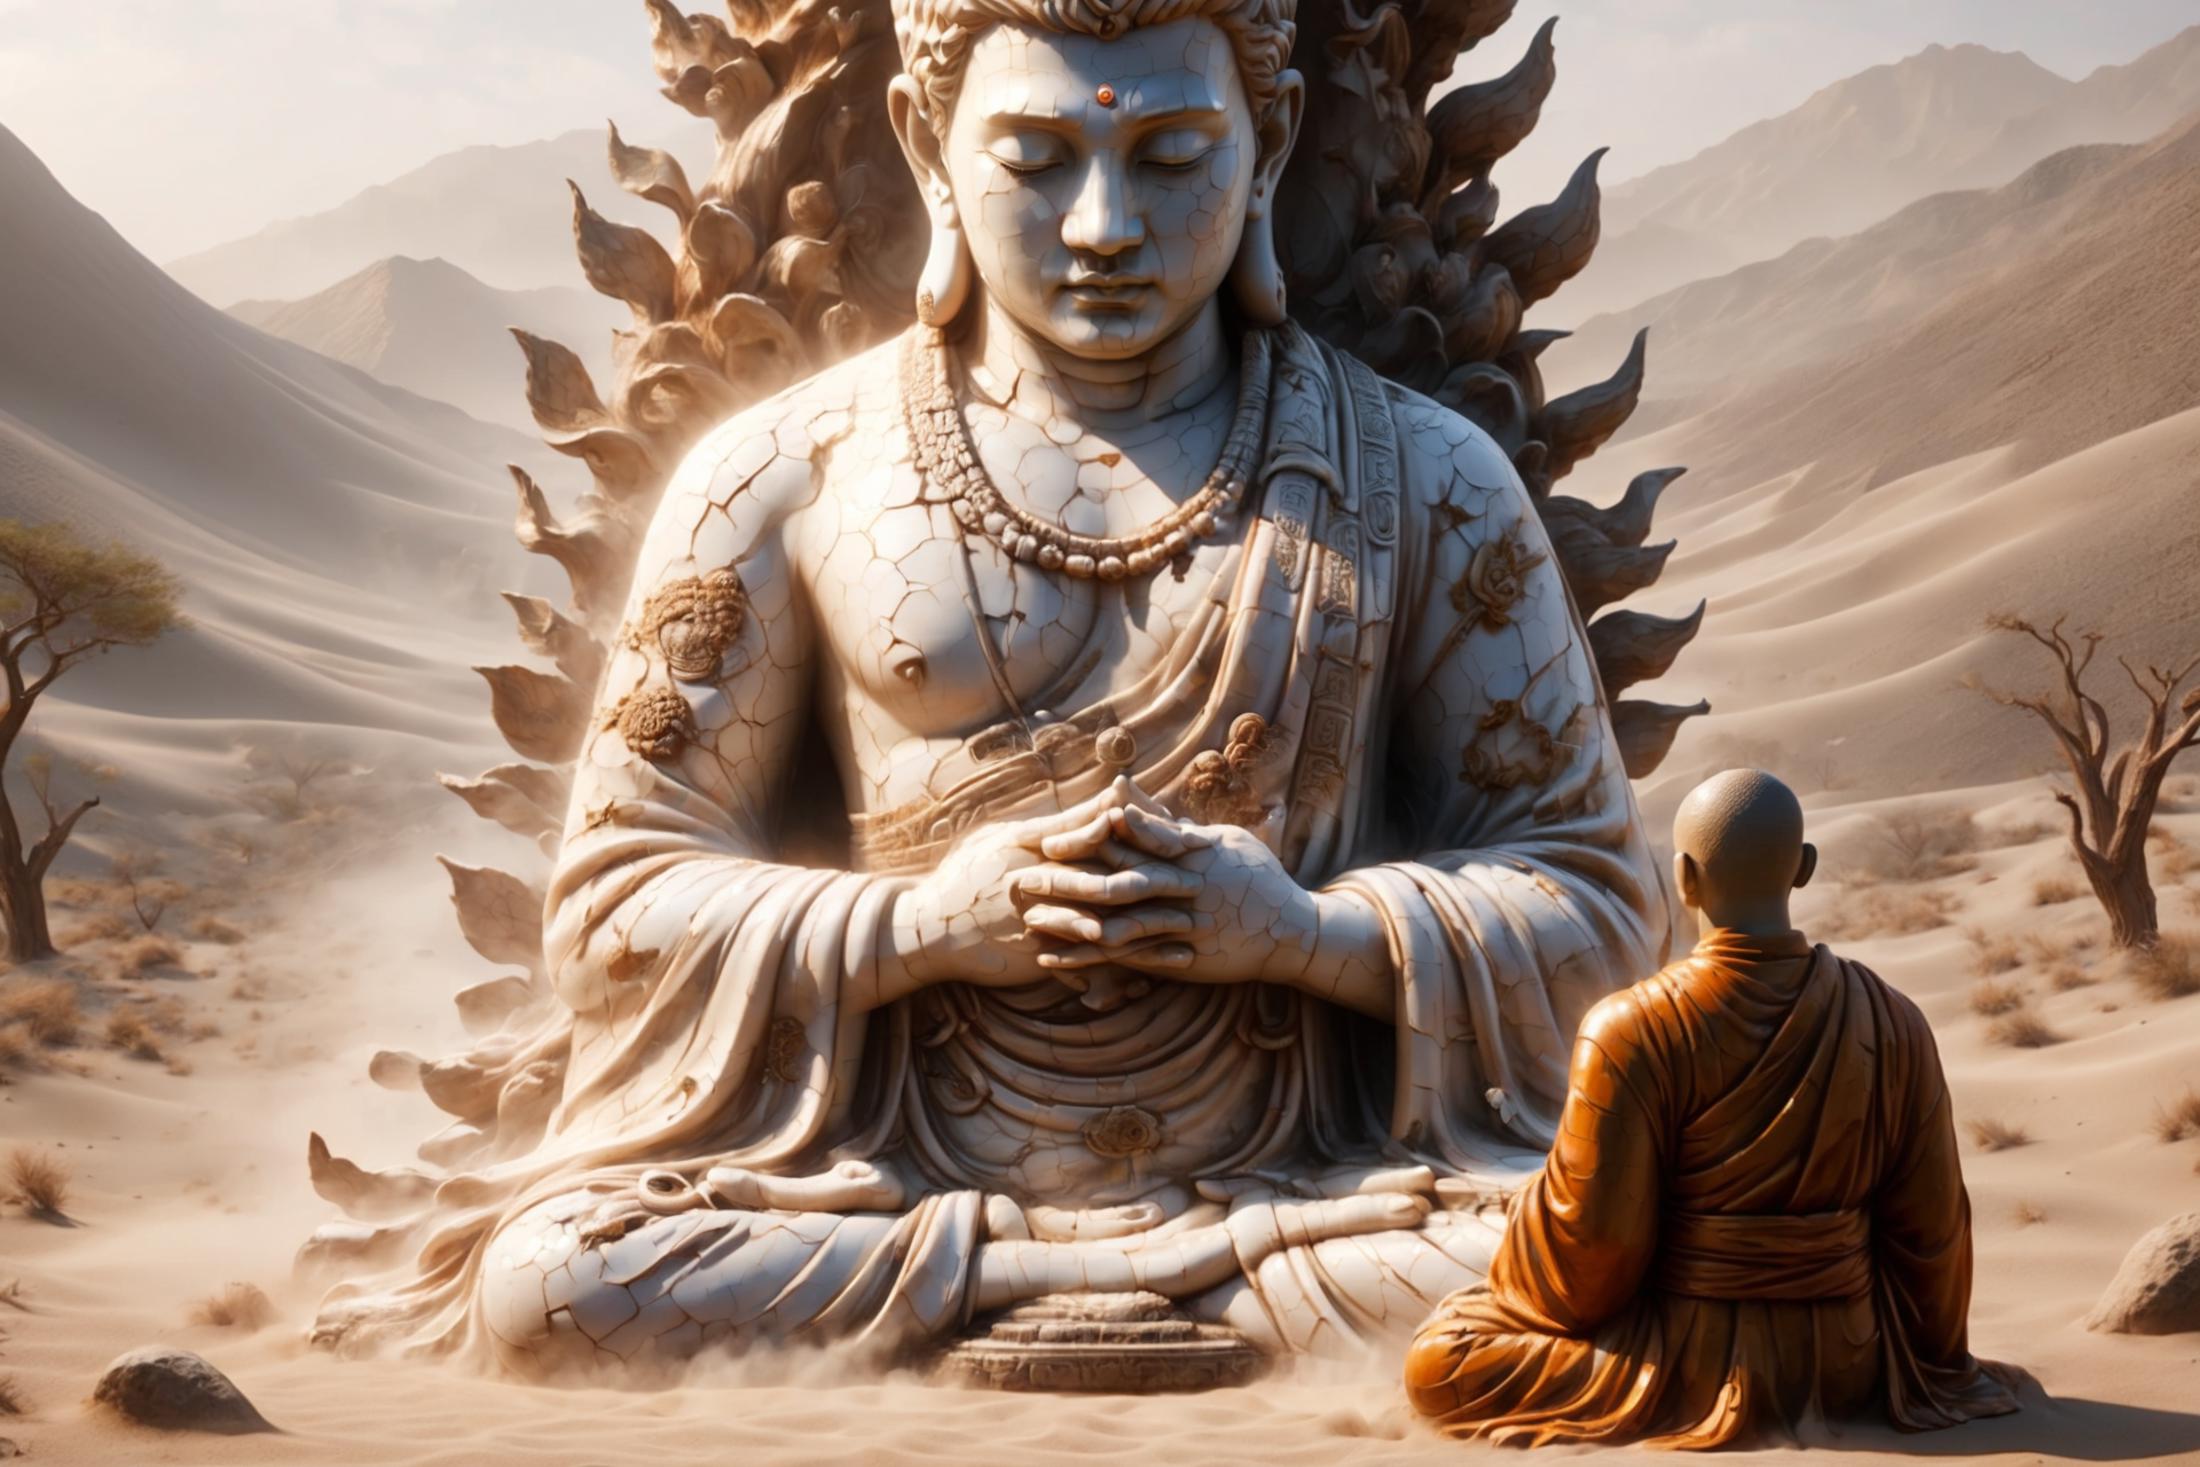 A statue of Buddha with a monk in front of it.